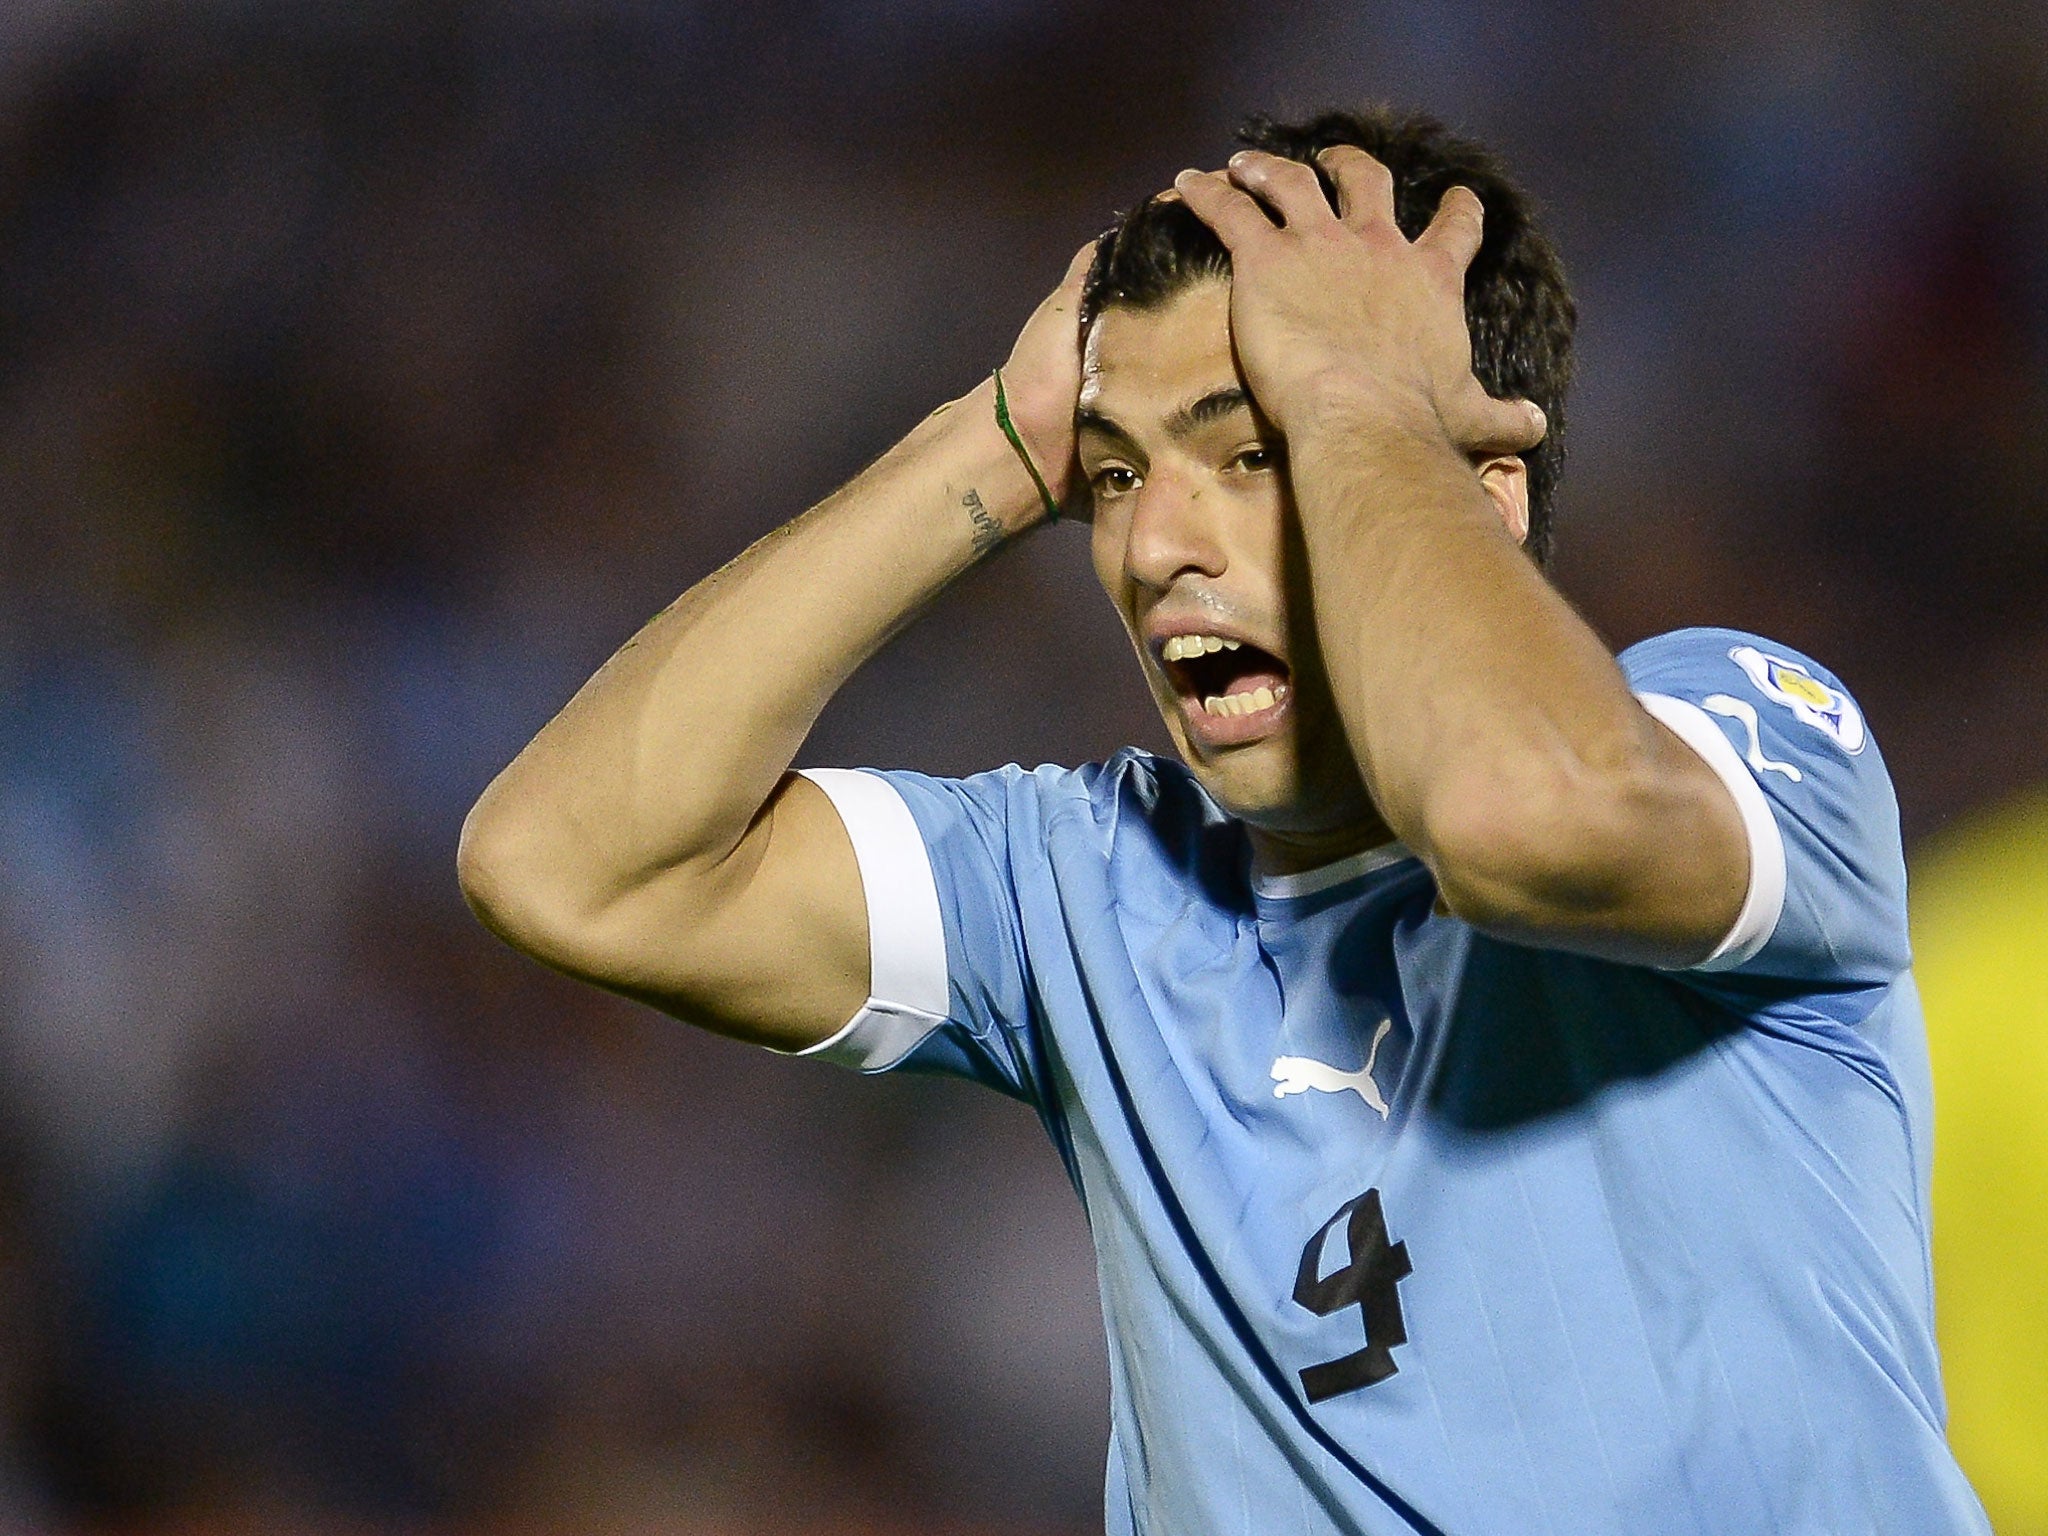 Luis Suarez reacts during Uruguay's 3-2 victory over Argentina